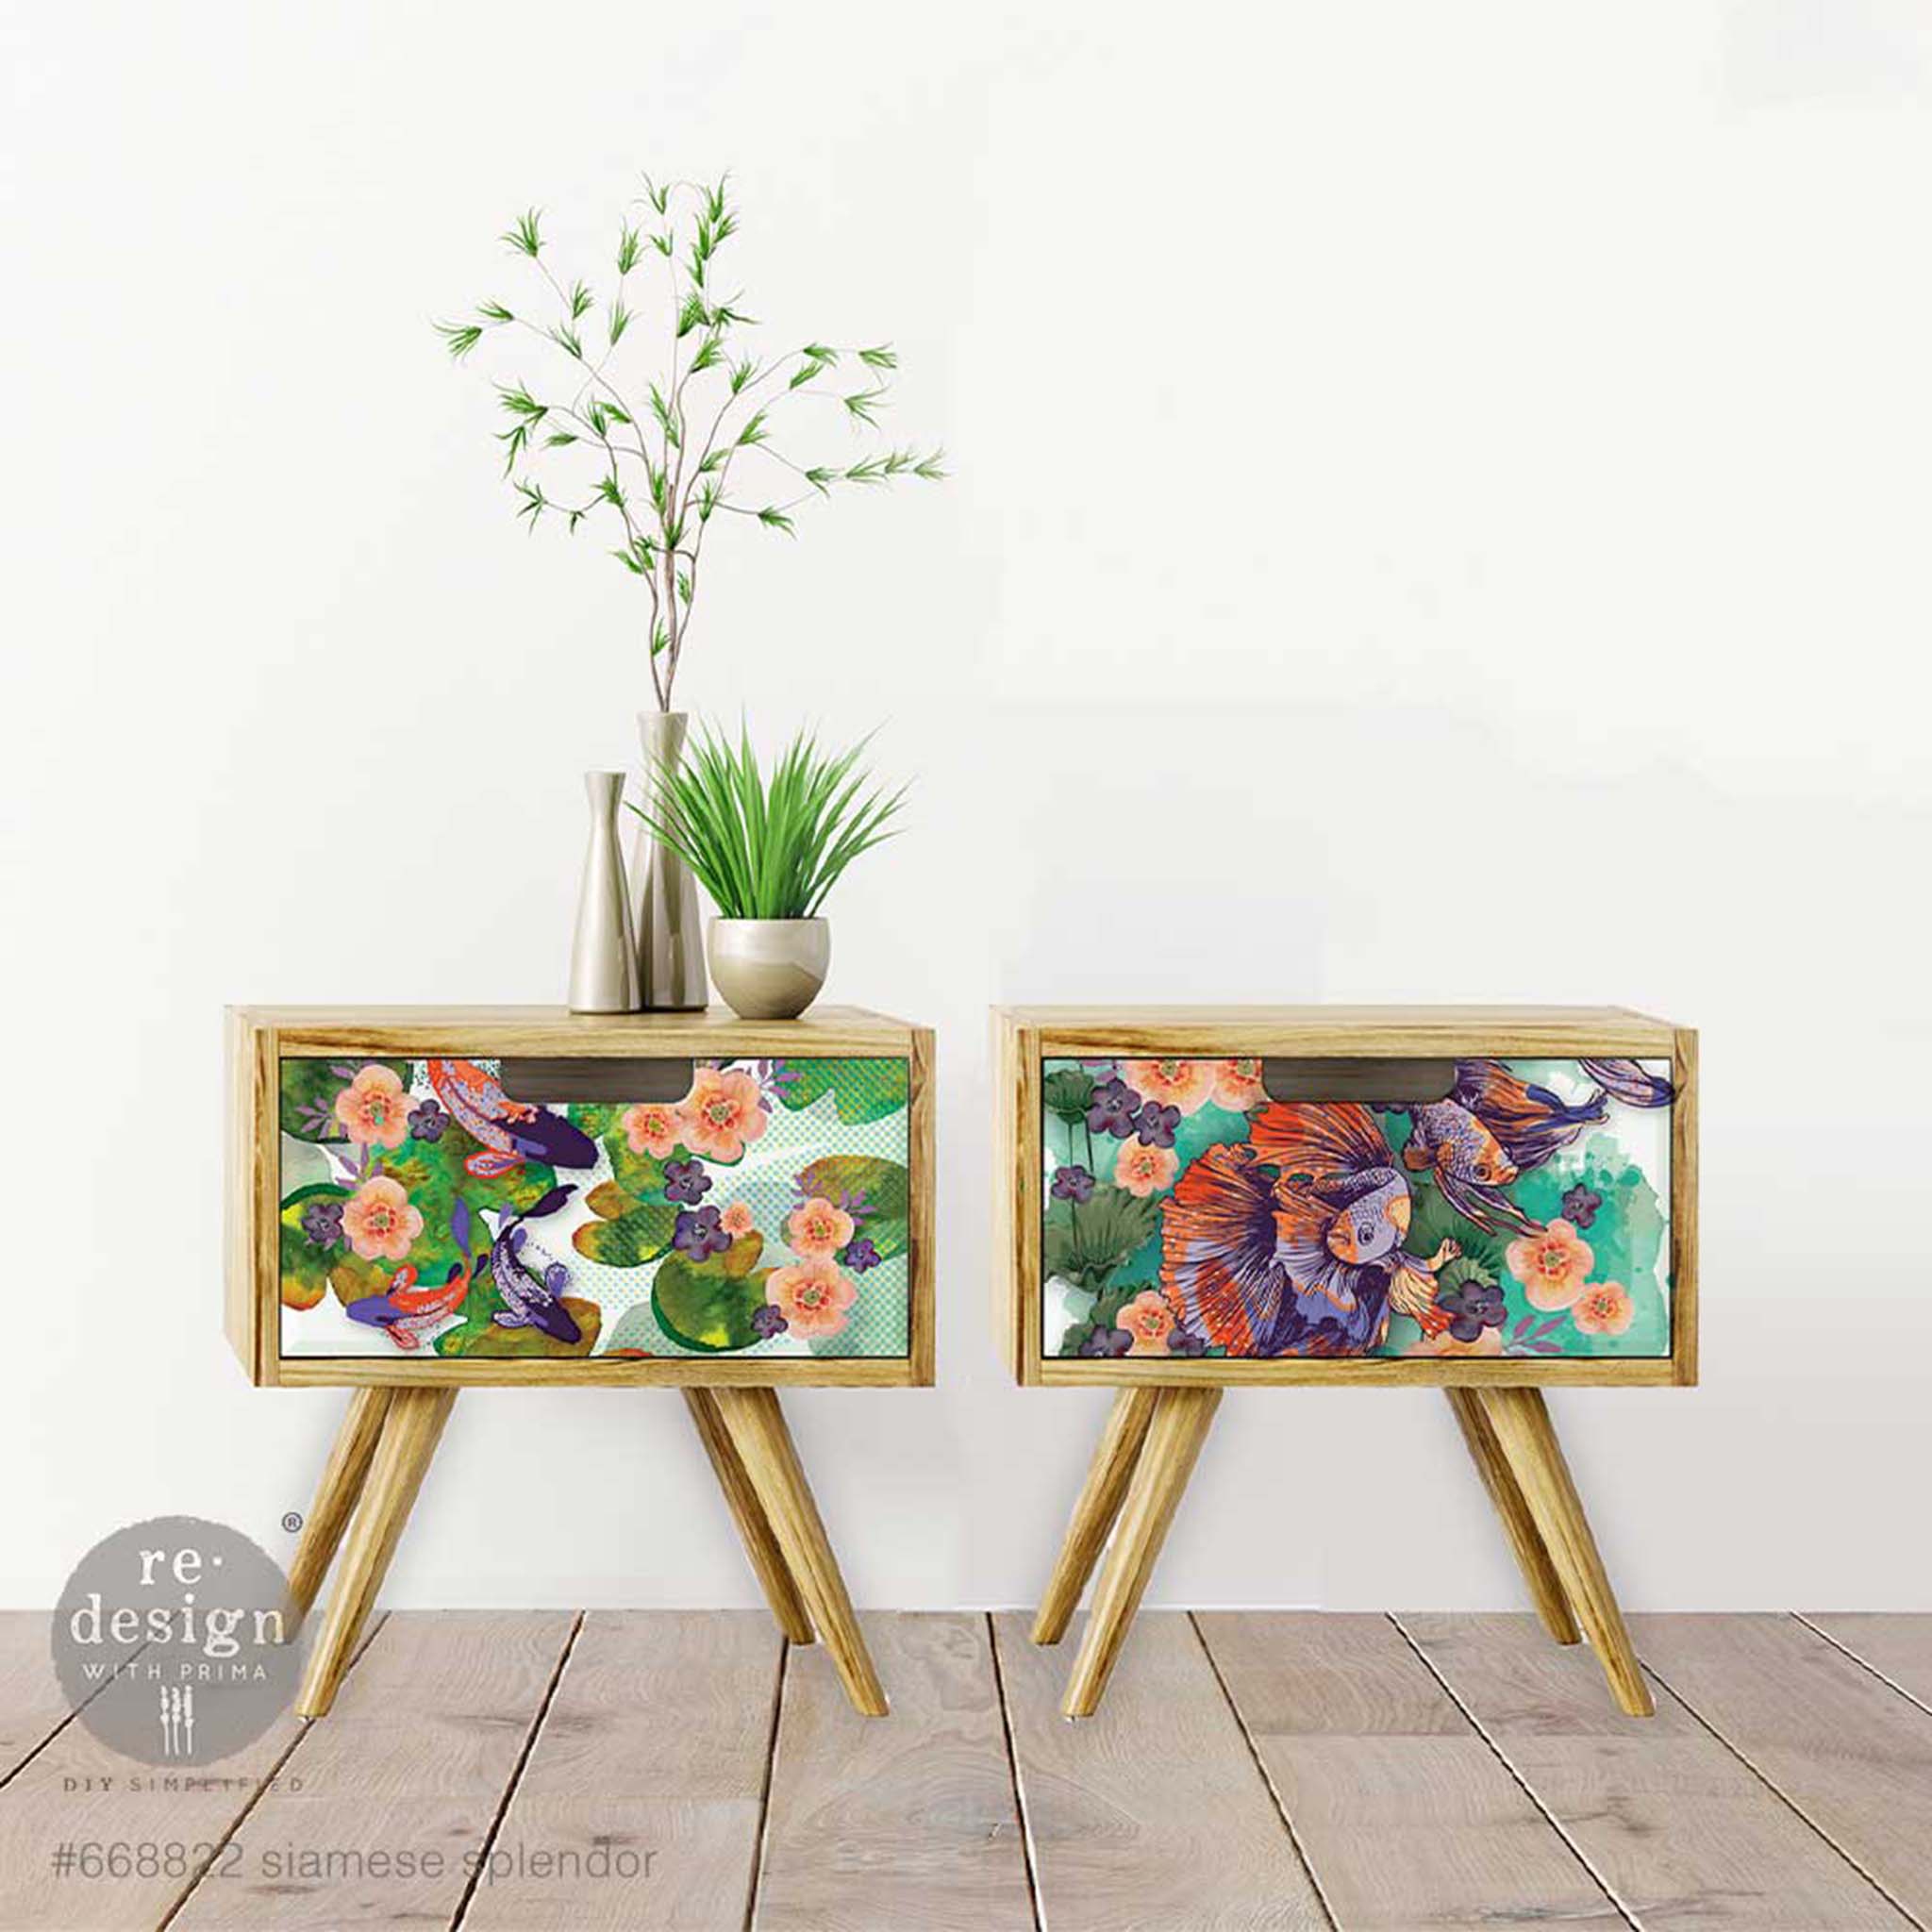 Two mid-century nightstands with 1 drawer each are a light natural wood and features ReDesign with Prima's Siamese Splendor 12"x12" rub-on transfer on the drawers.